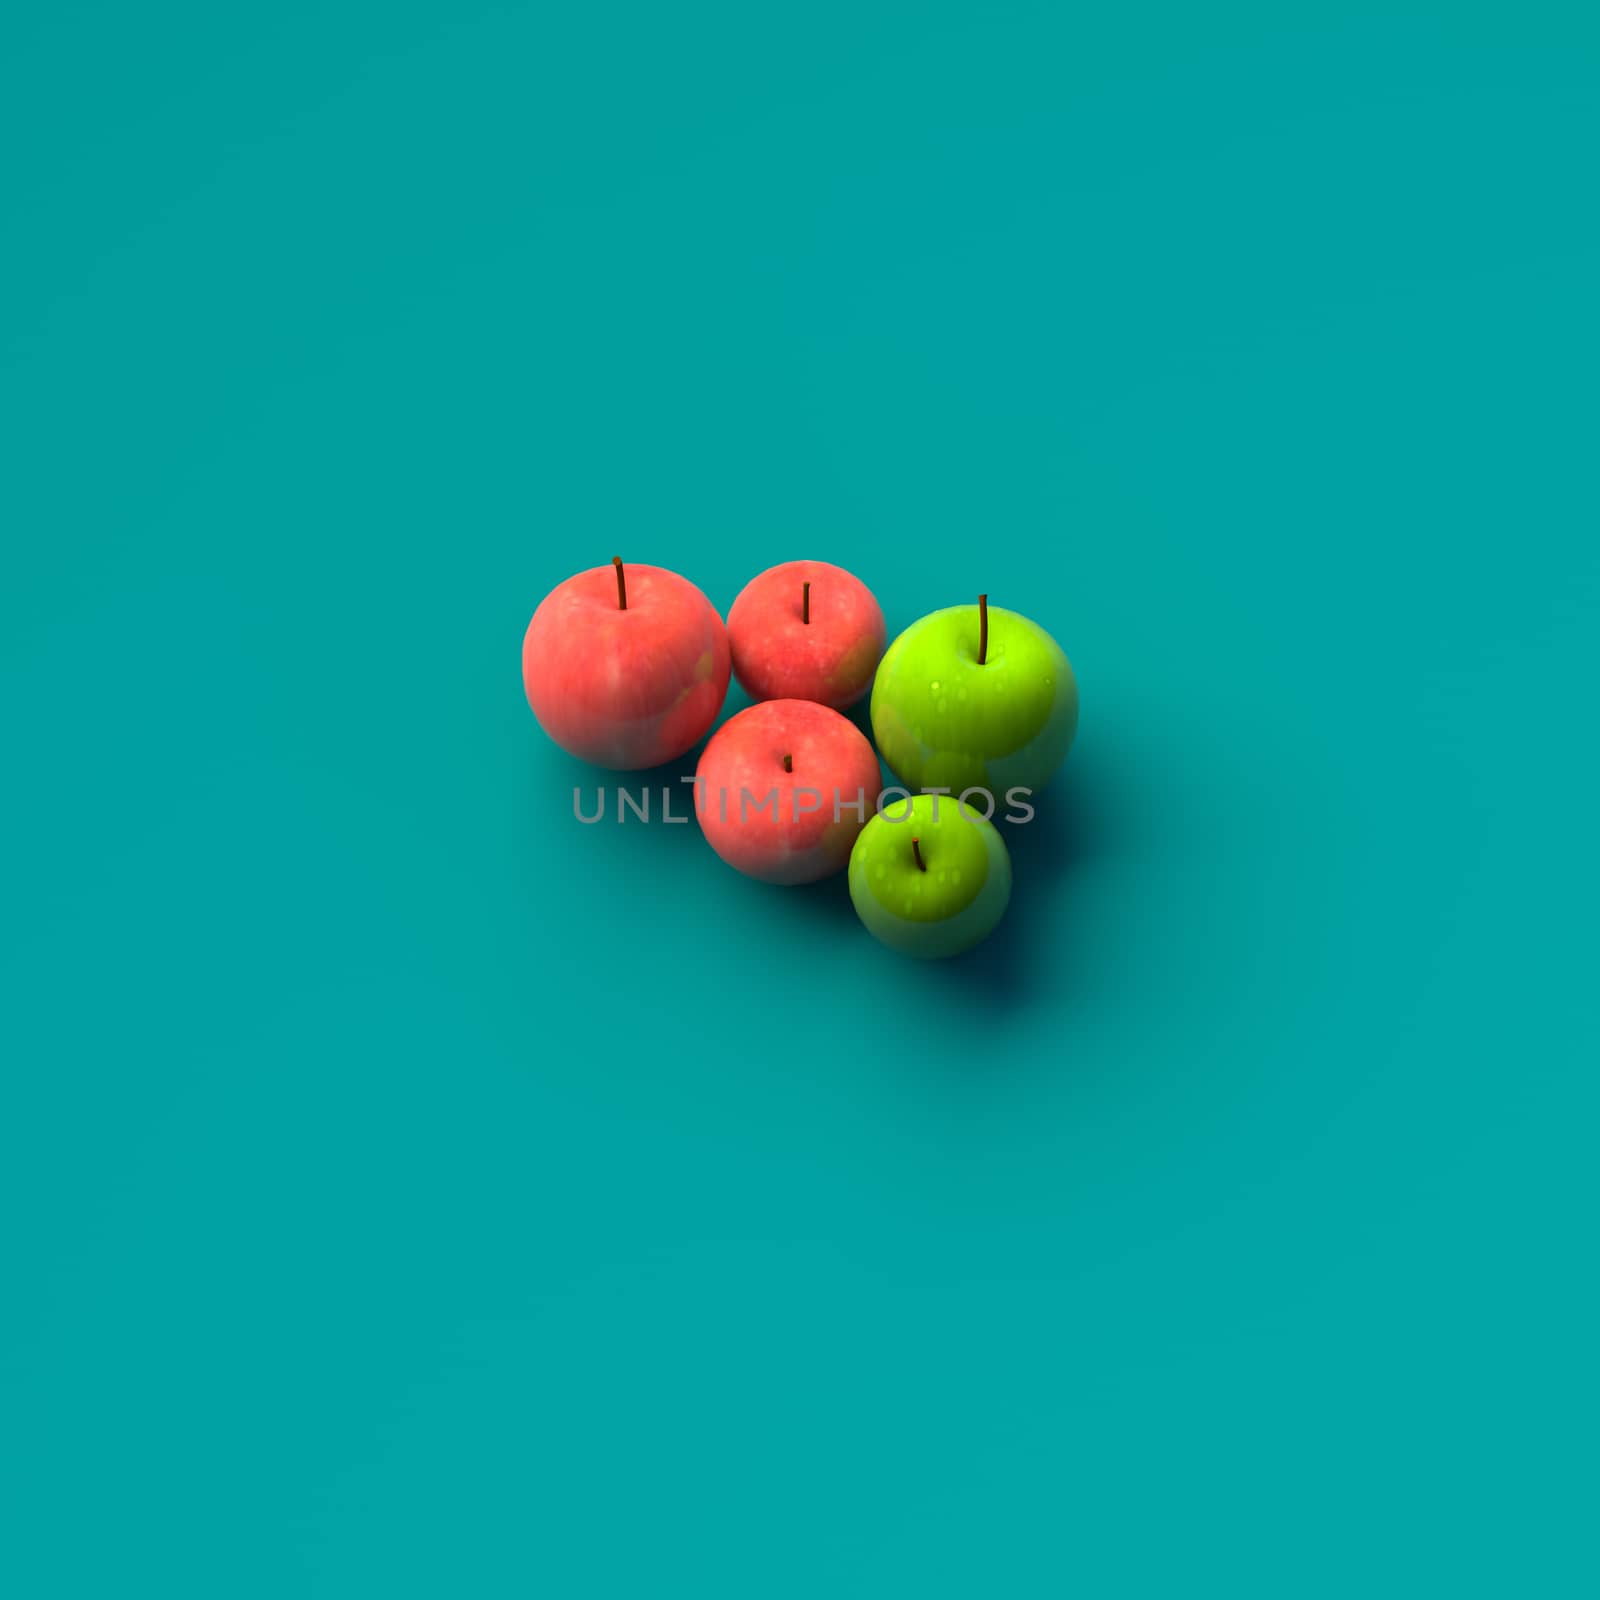 3D RENDERING OF RED APPLES AND GREEN PEARS IN BASKET ON PLAIN BACKGROUND by PrettyTG